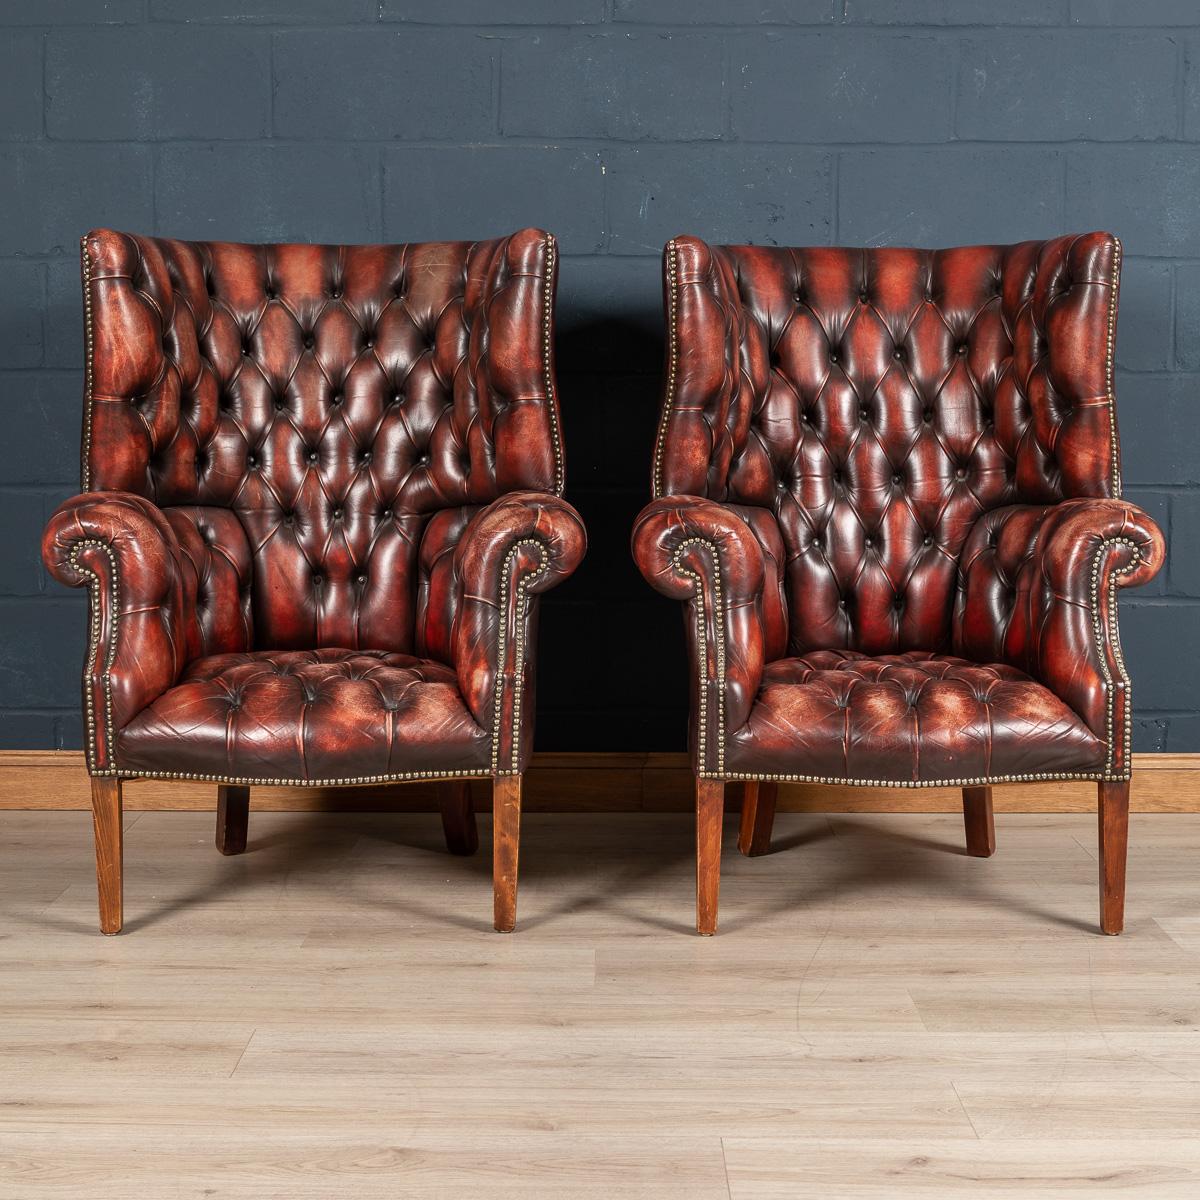 A truly excellent pair of barrel back leather armchairs. The characteristic of a barrel back chair is a high back, semi circular back rest. This particular pair dates back to around the second half the last century. These is some discolouration to